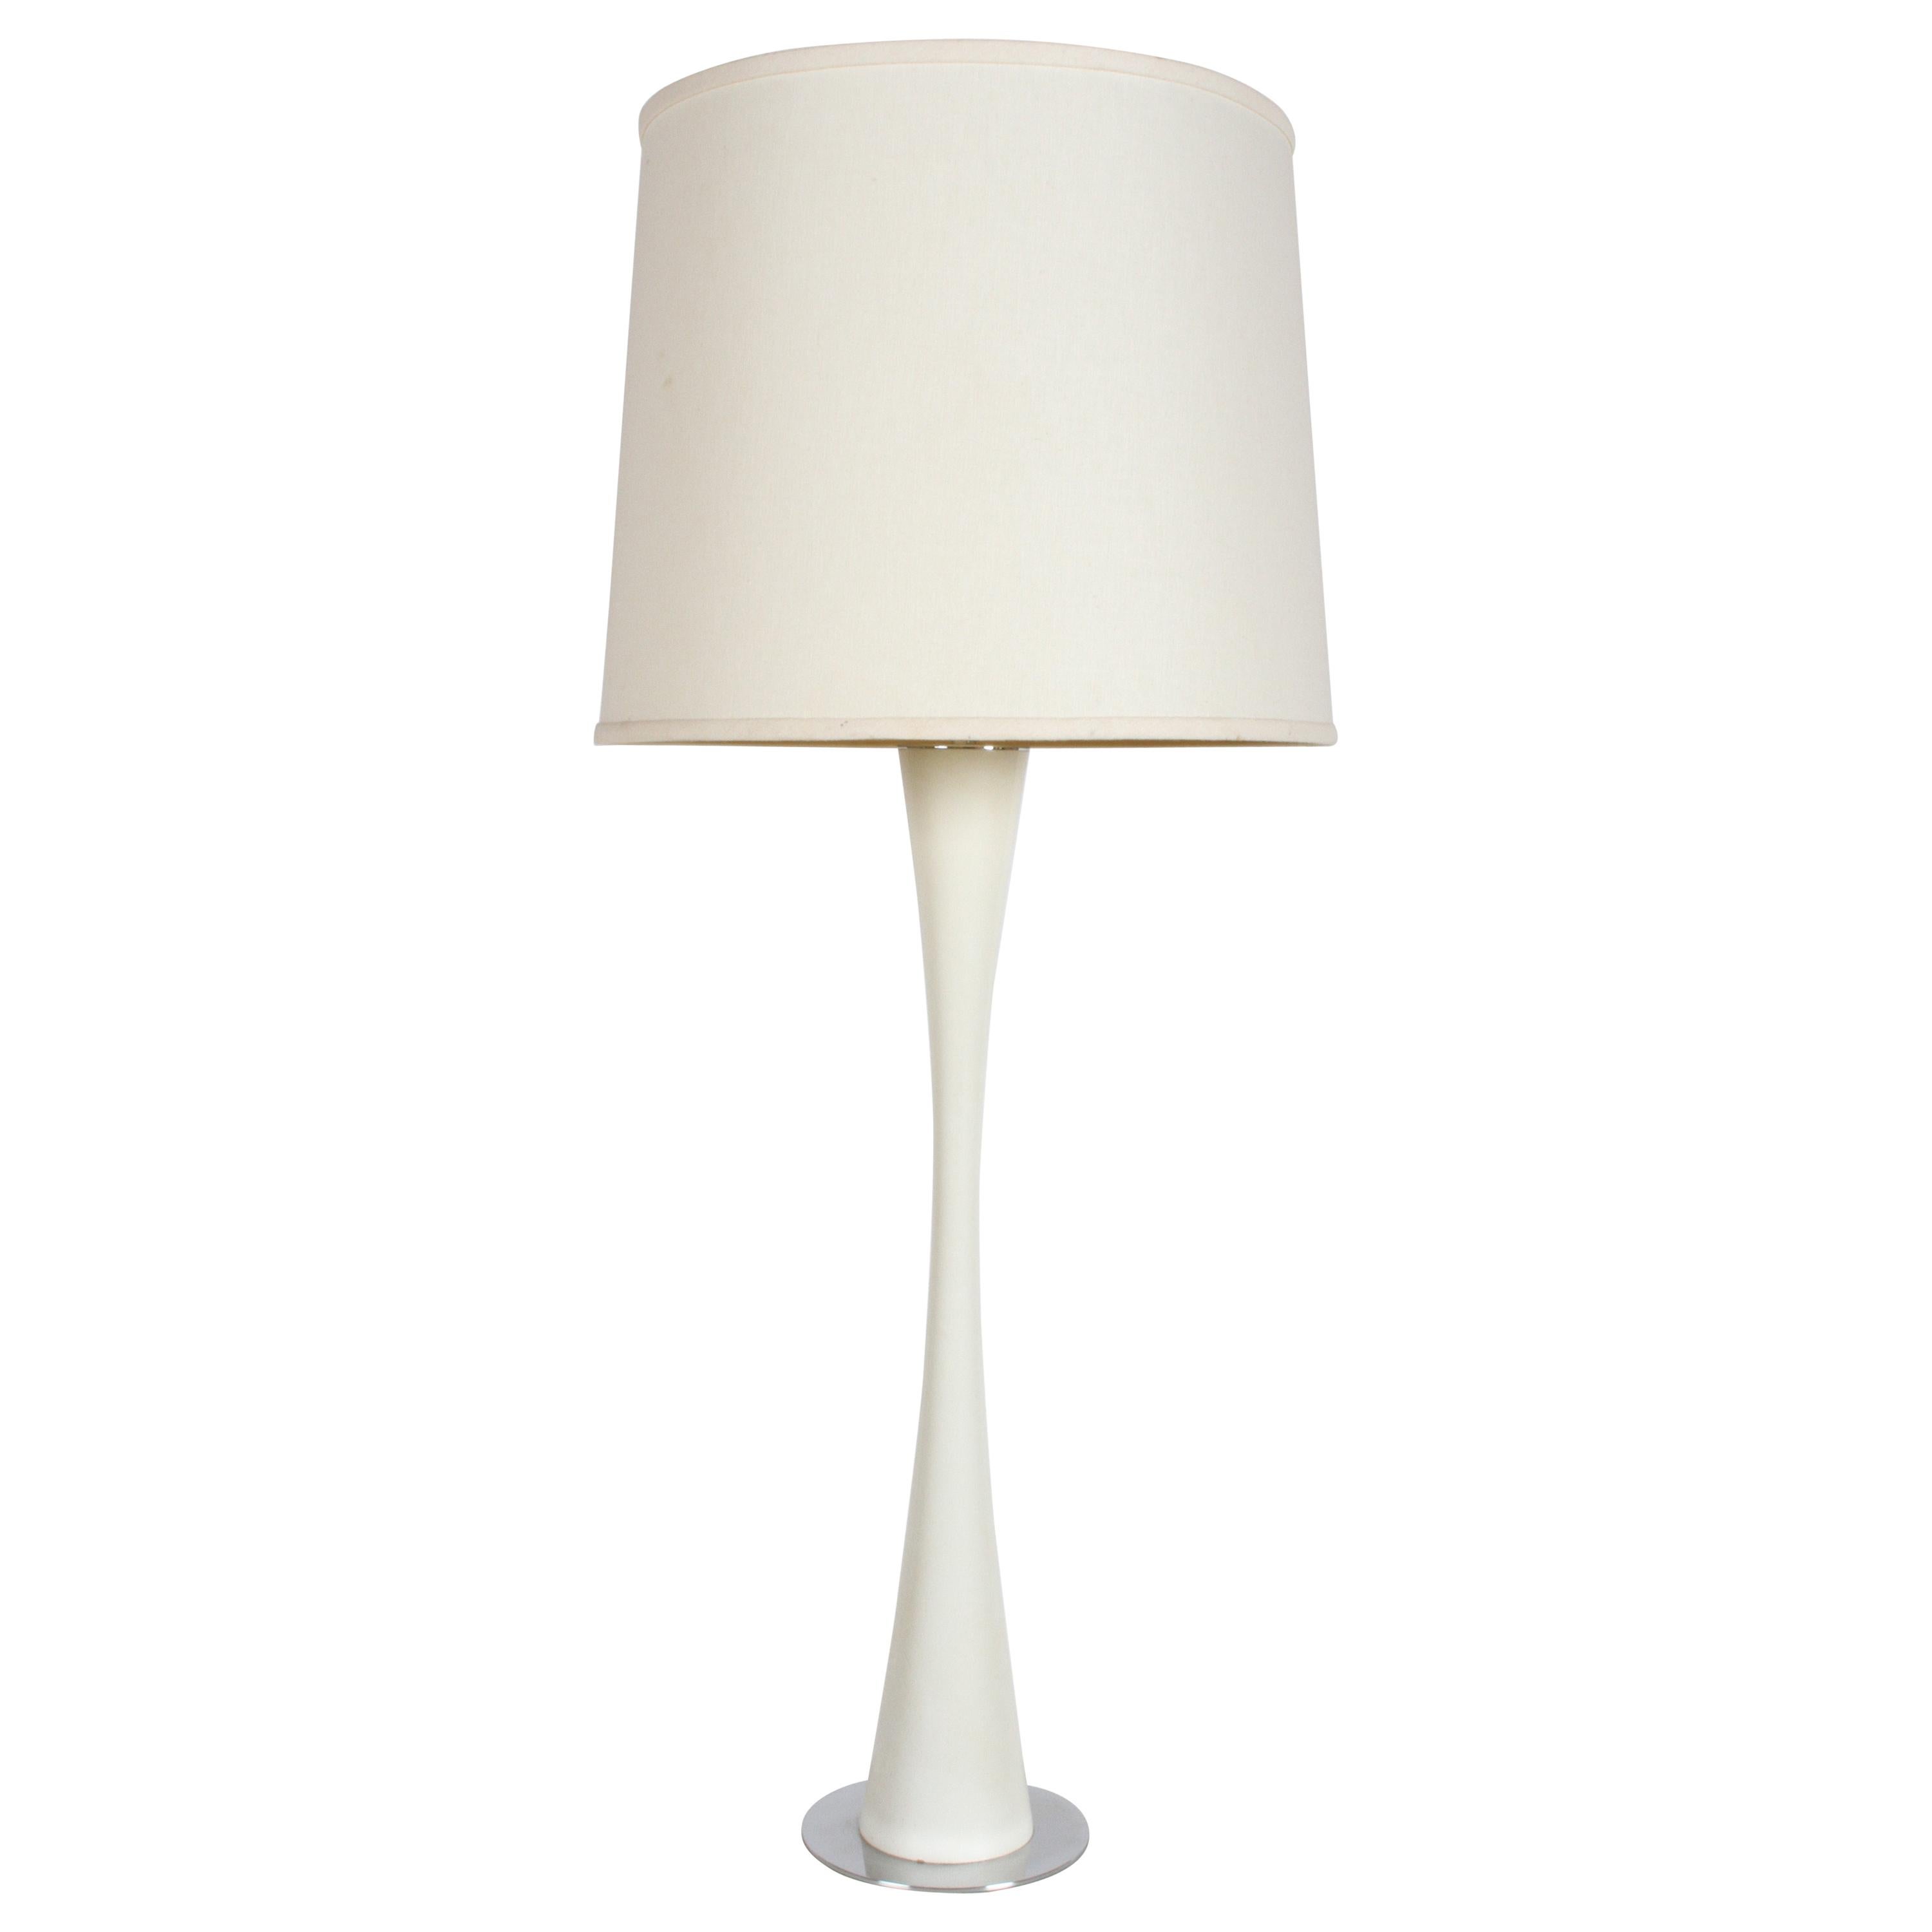 Tall Mid-Century Modern White Tulip Form Column Table Lamp with Chrome Base For Sale